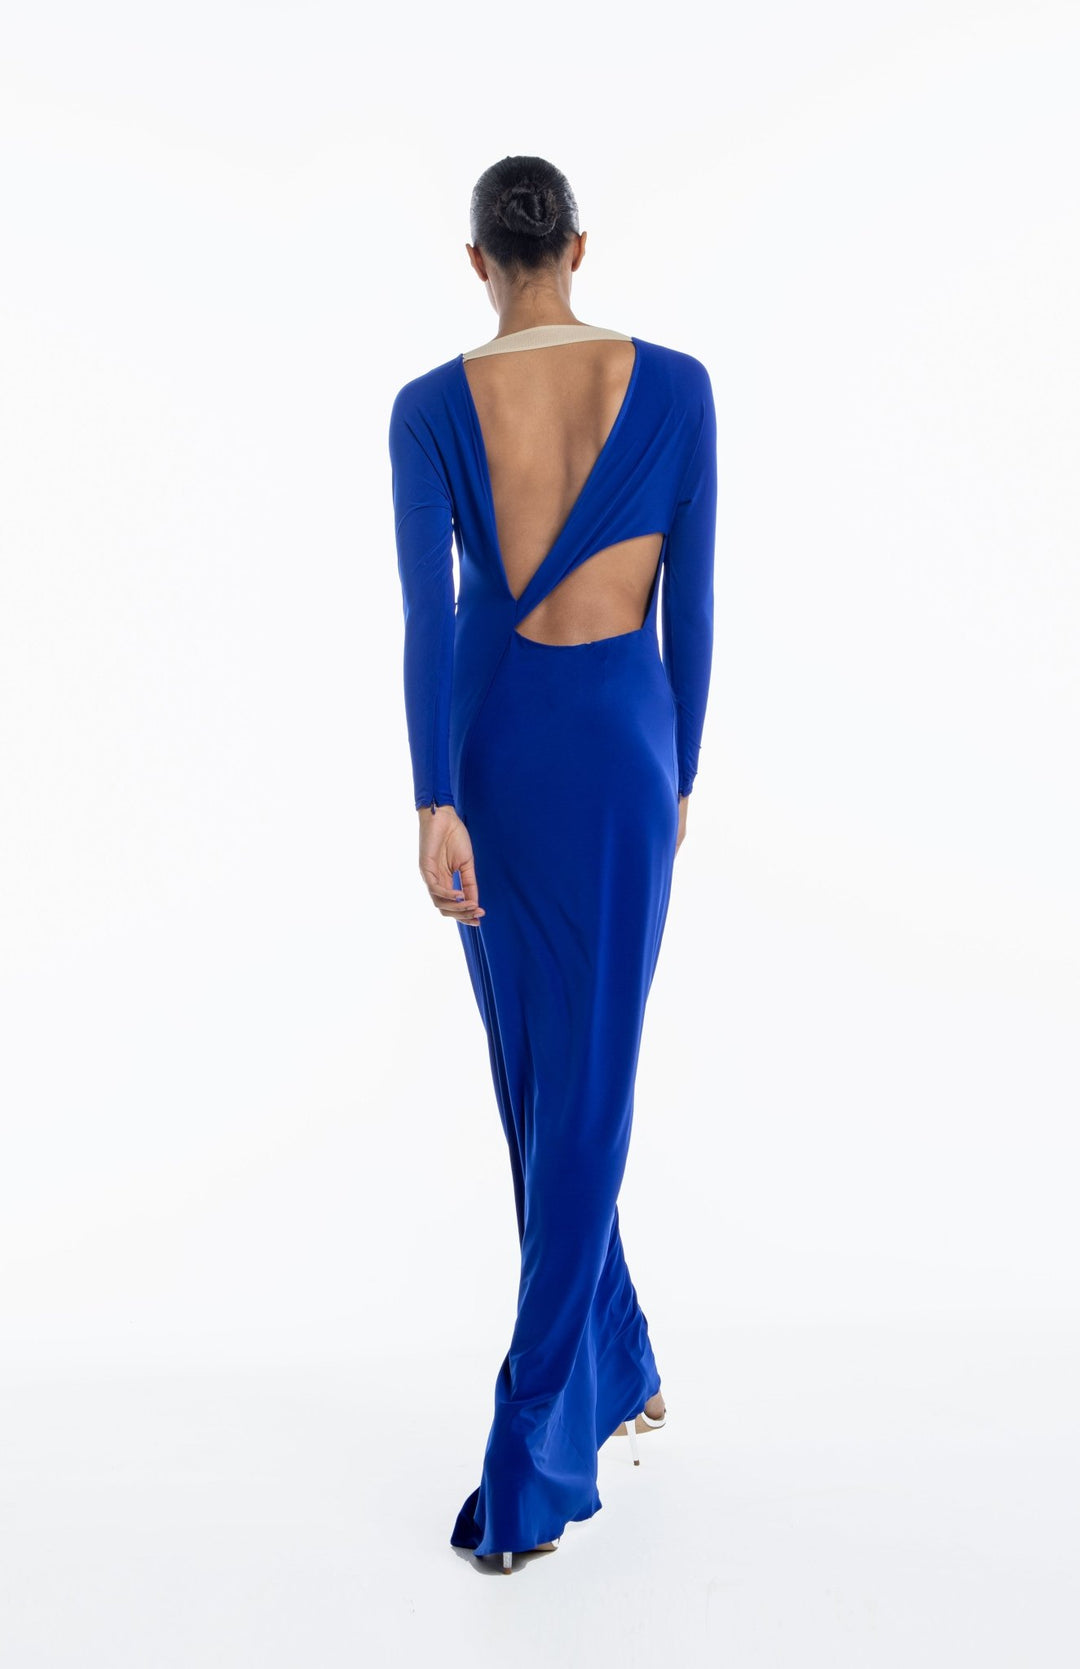 Grecian style, Long sleeve long dress, with back cutout detail in royal blue jersey knit